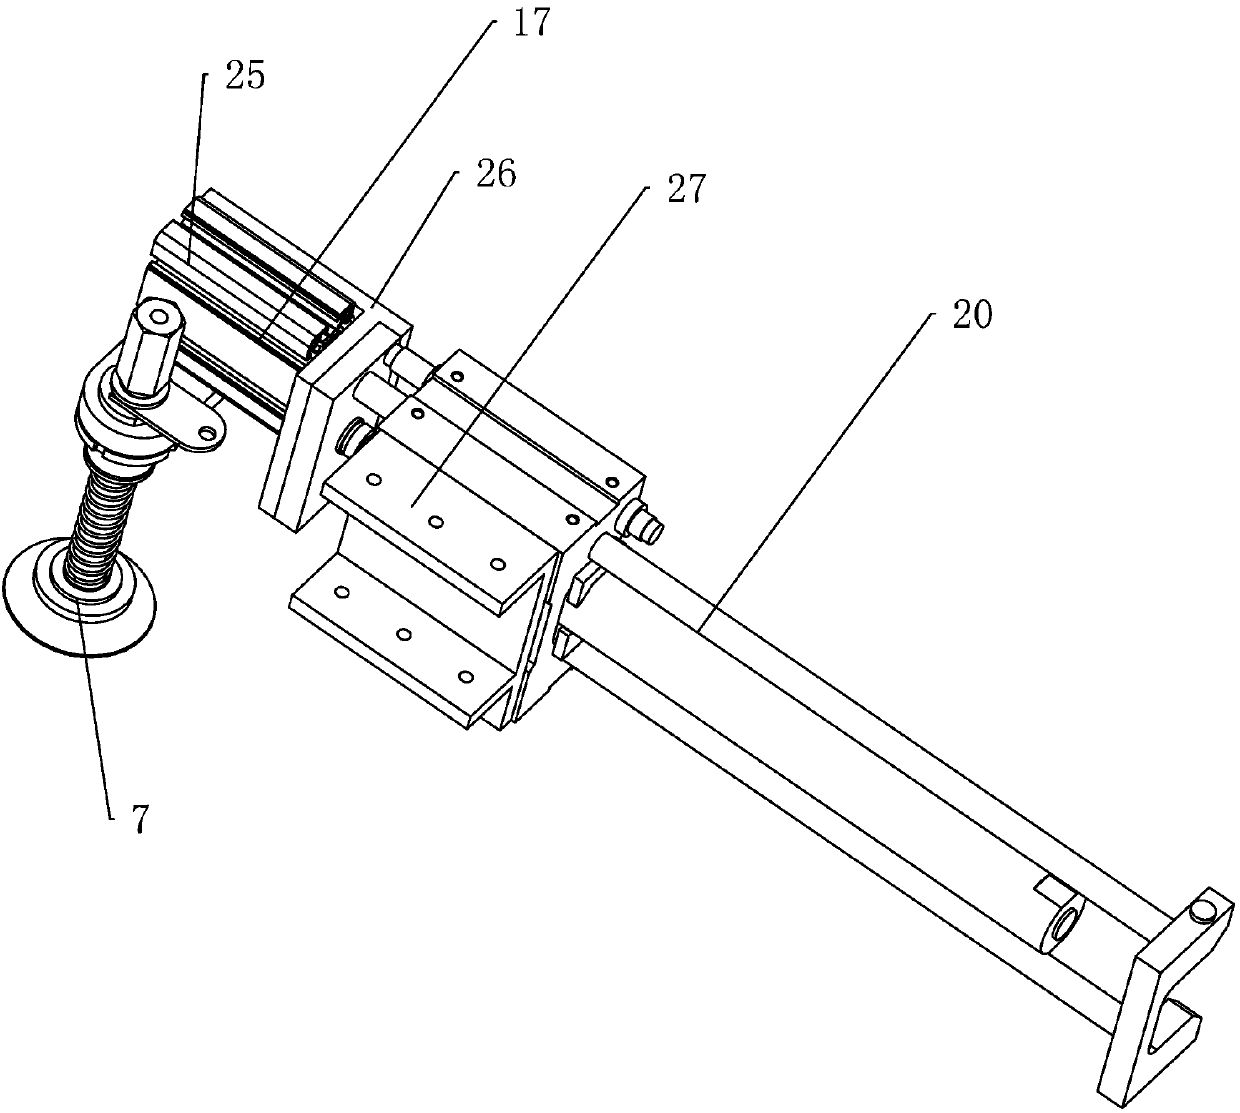 Dynamic measurement gripper with space two-freedom-degree telescopic function and method of dynamic measurement gripper